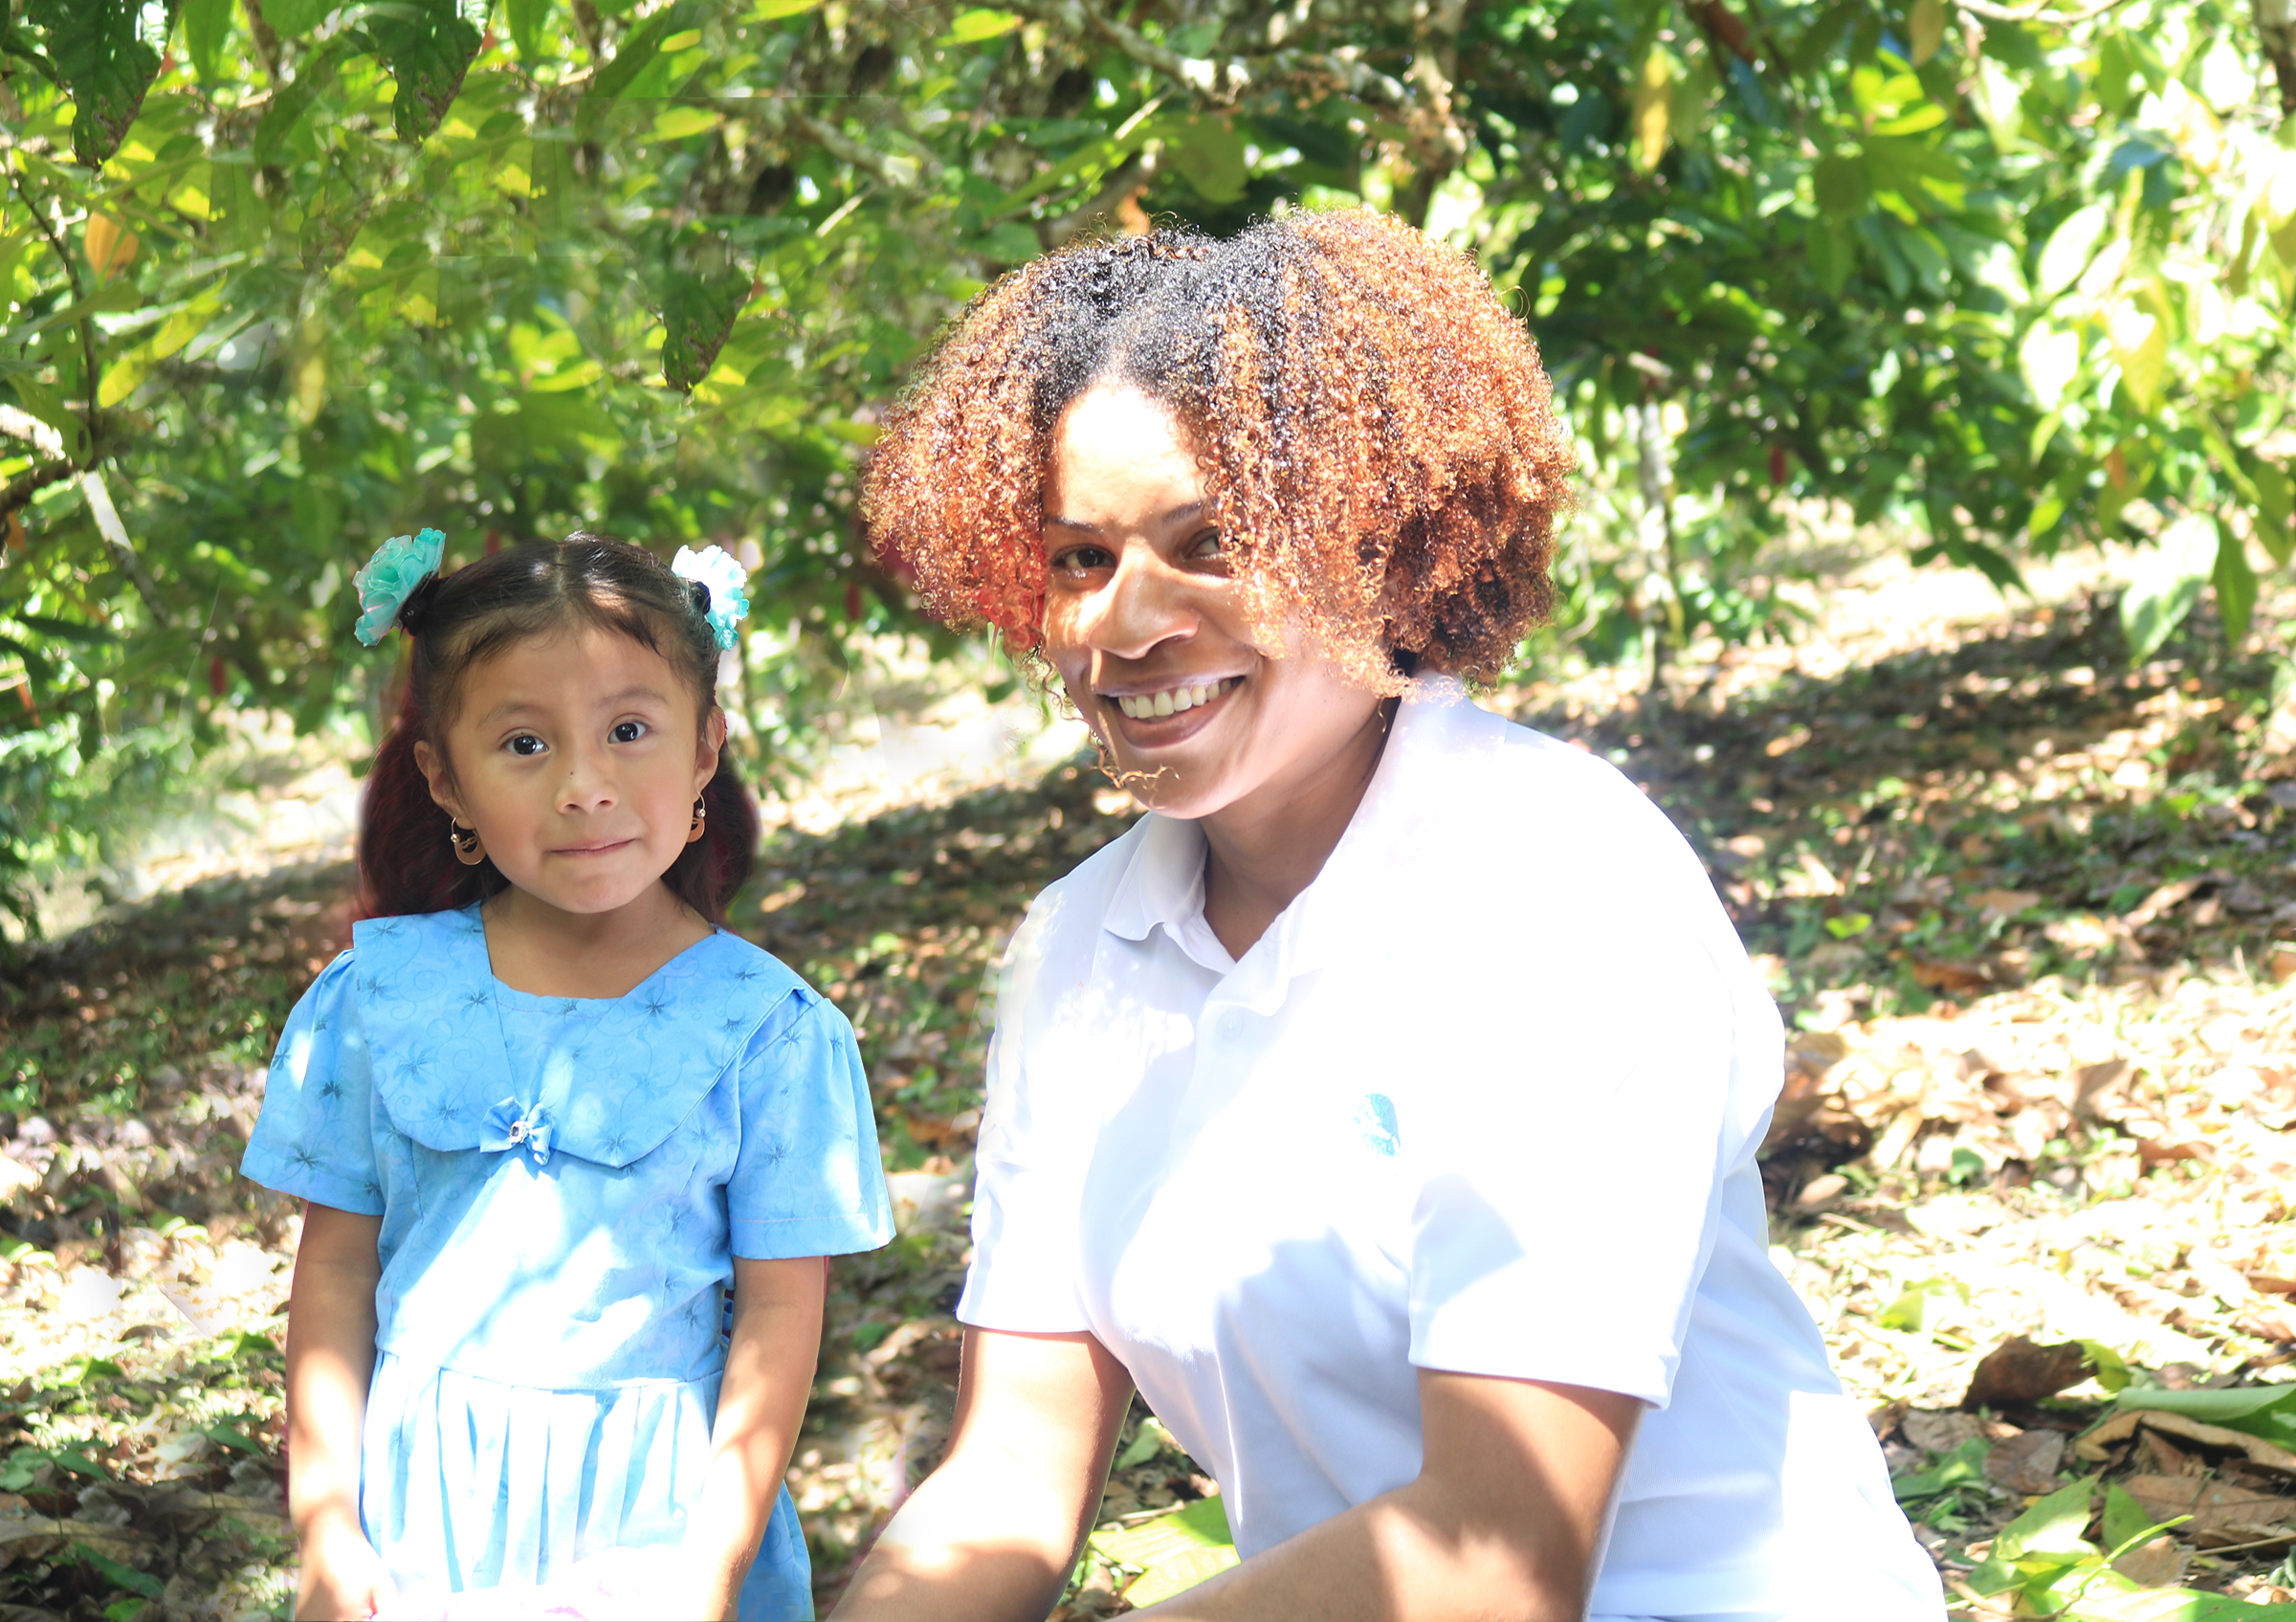 female CDB staff member smiling posing next to a small child